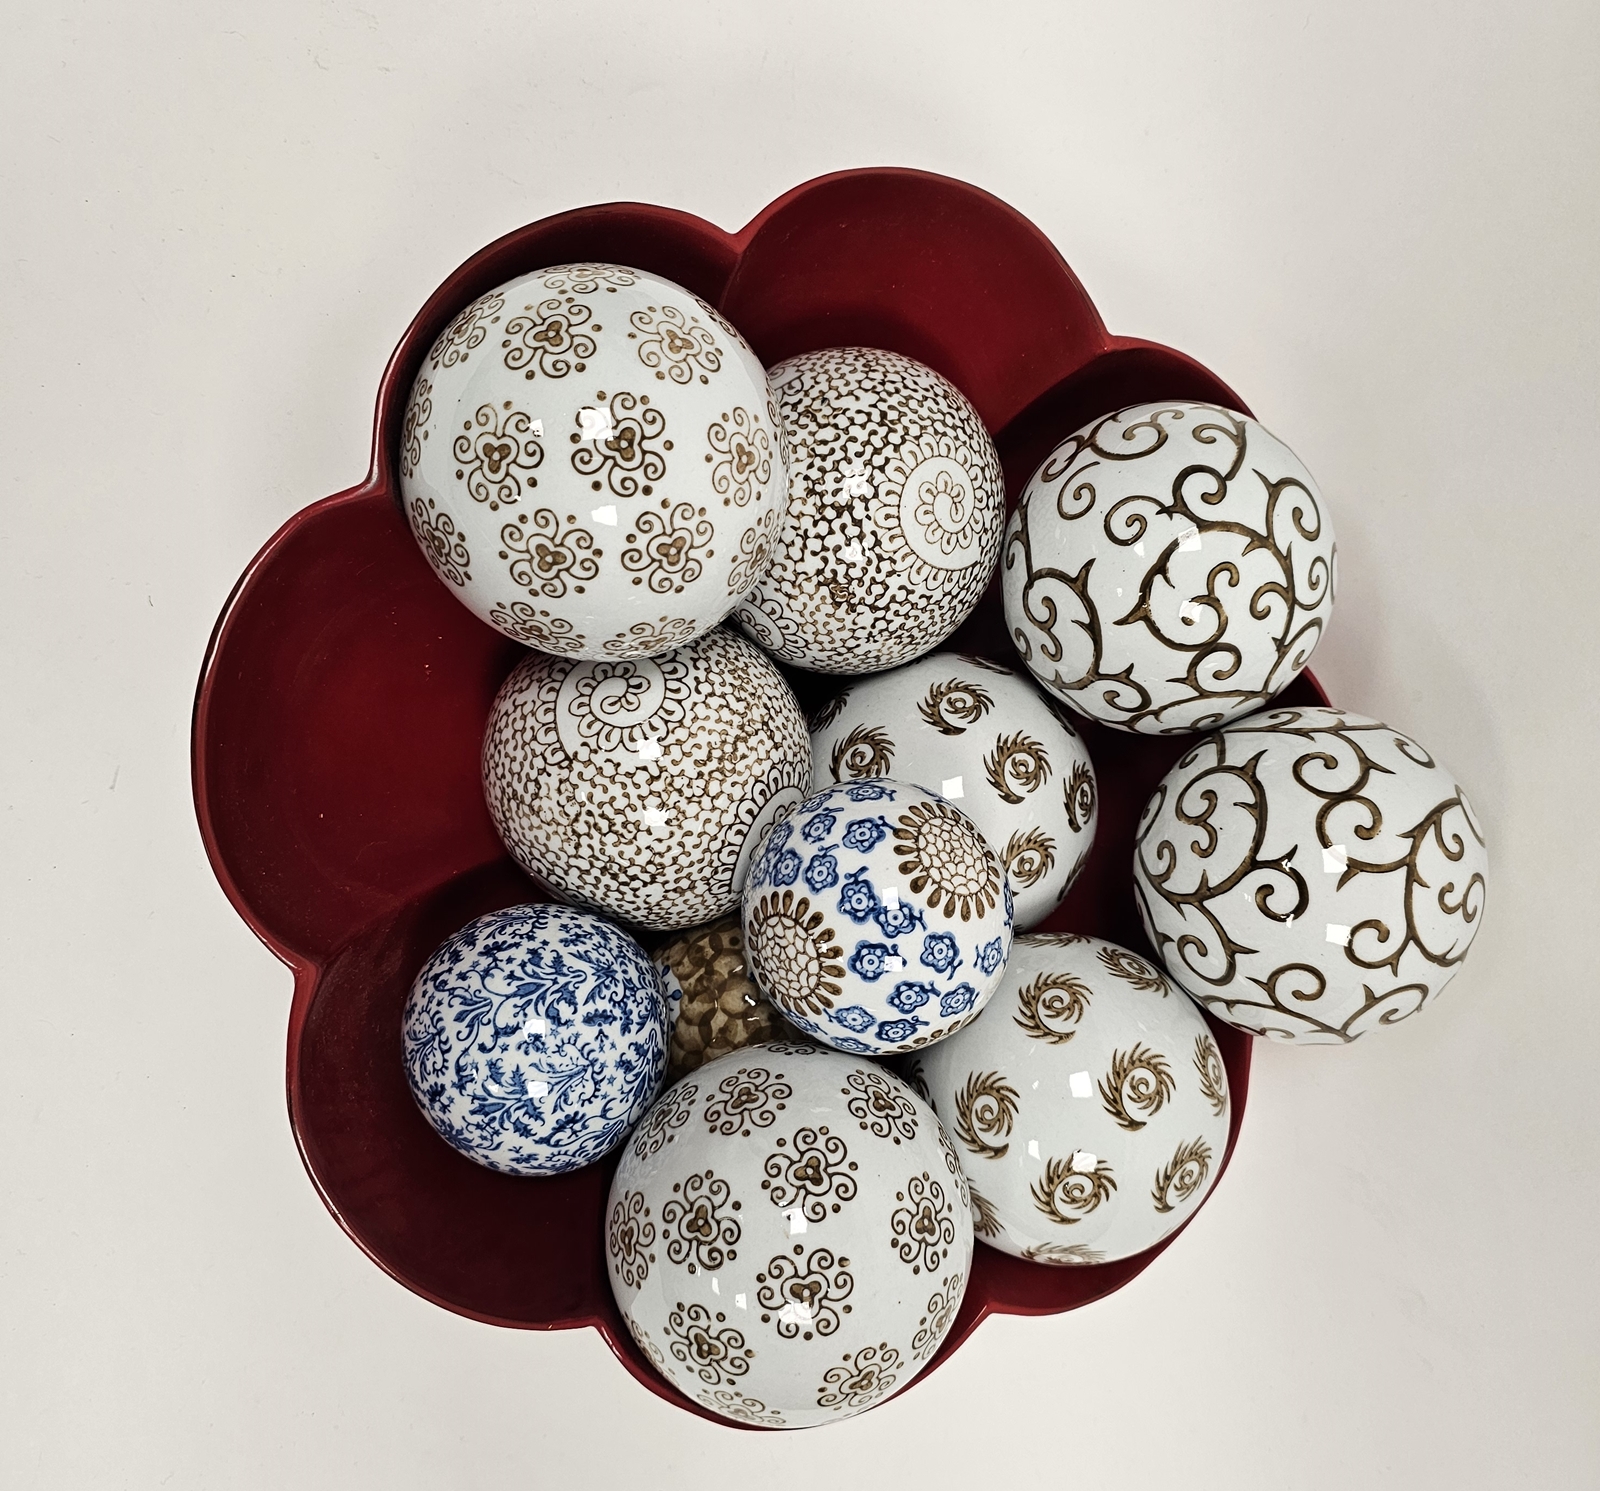 Quantity of printed ceramic spheres with scroll and stylised floral decoration in red lacquered bowl - Image 2 of 2